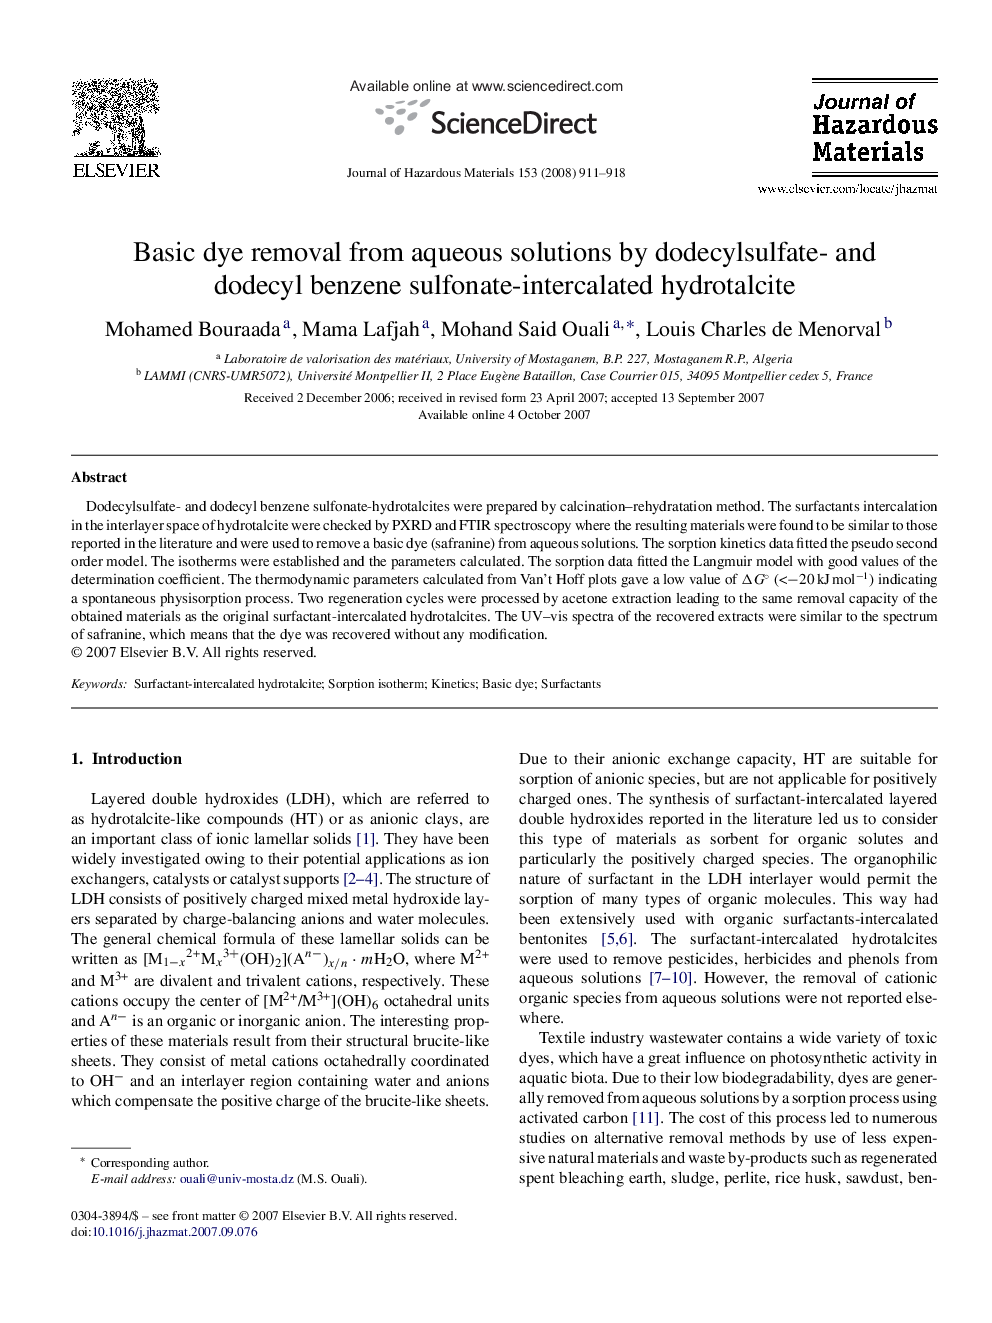 Basic dye removal from aqueous solutions by dodecylsulfate- and dodecyl benzene sulfonate-intercalated hydrotalcite